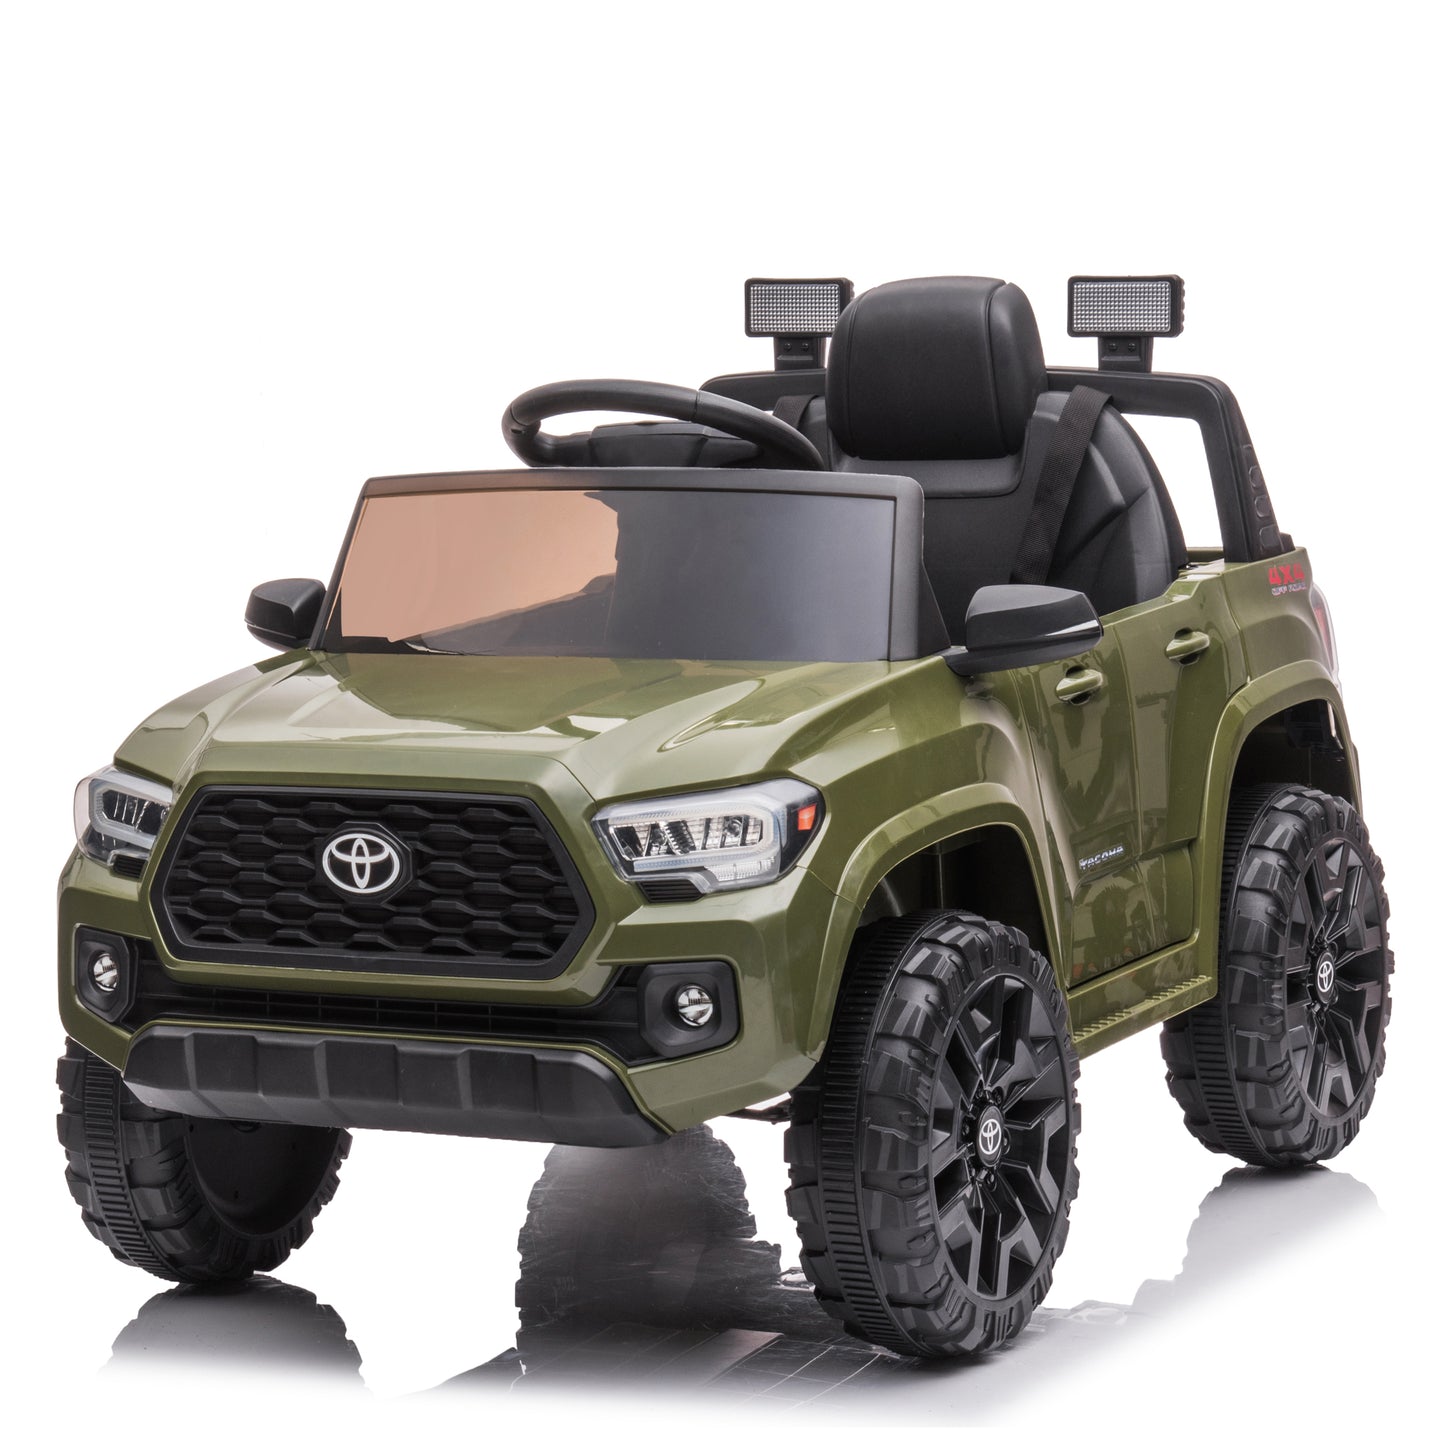 Licensed Toyota Tacoma Ride on Car for Kids, 12V Powered Ride on Toy with Remote Control, Electric Car Vehicle with LED Lights, MP3 Player, Battery Powered Toy Car for Boys/Girls, Green, Y019